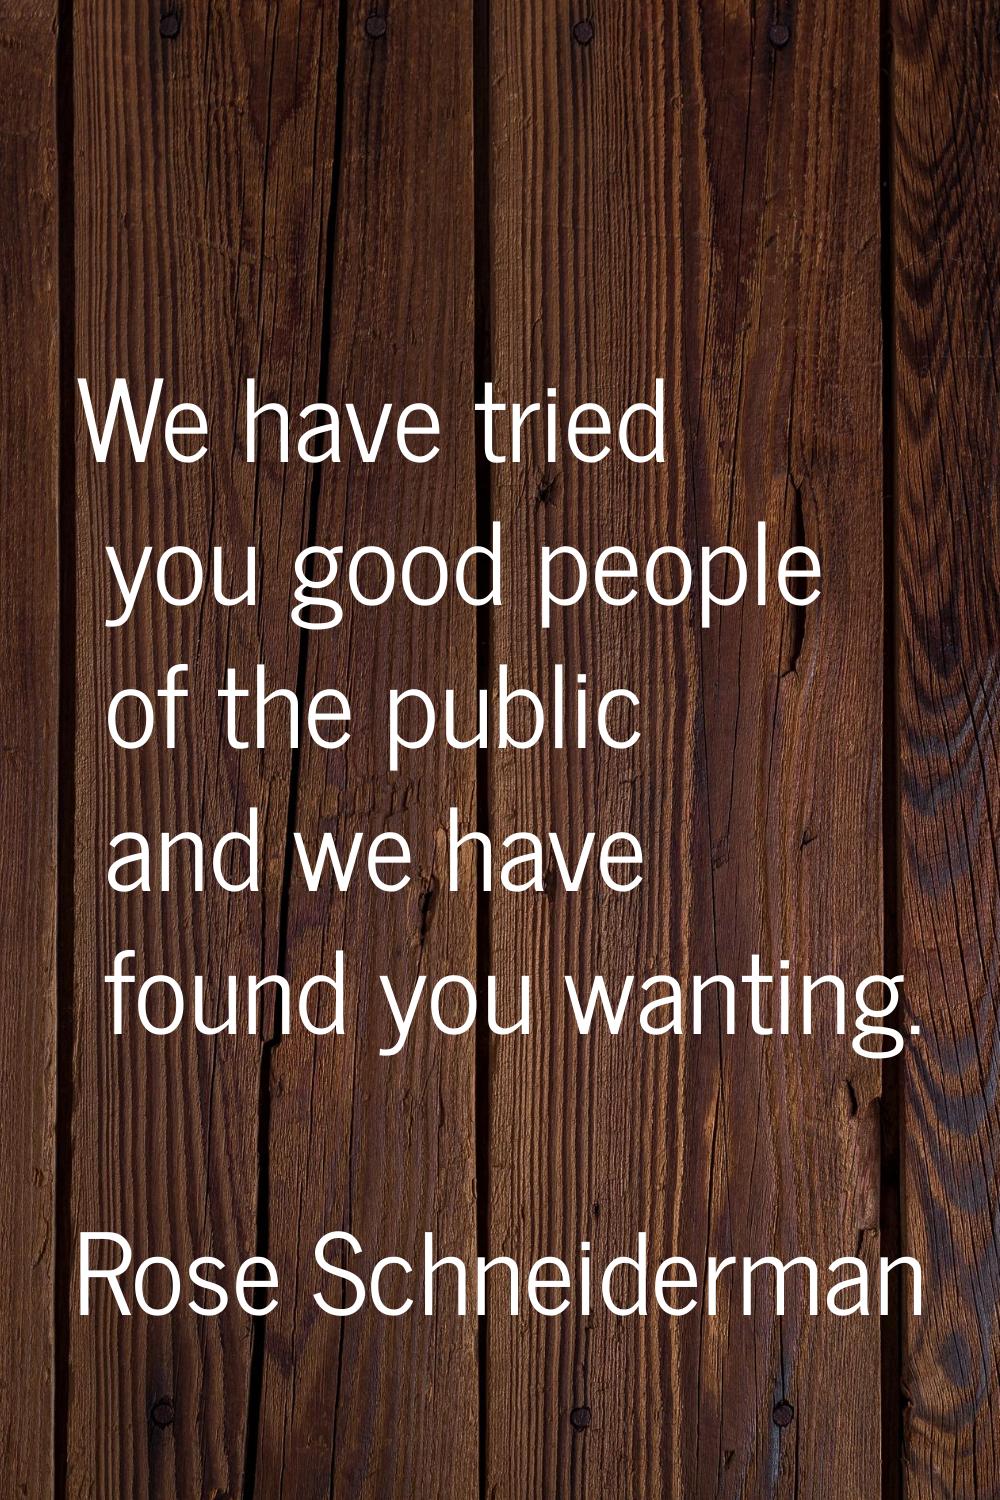 We have tried you good people of the public and we have found you wanting.